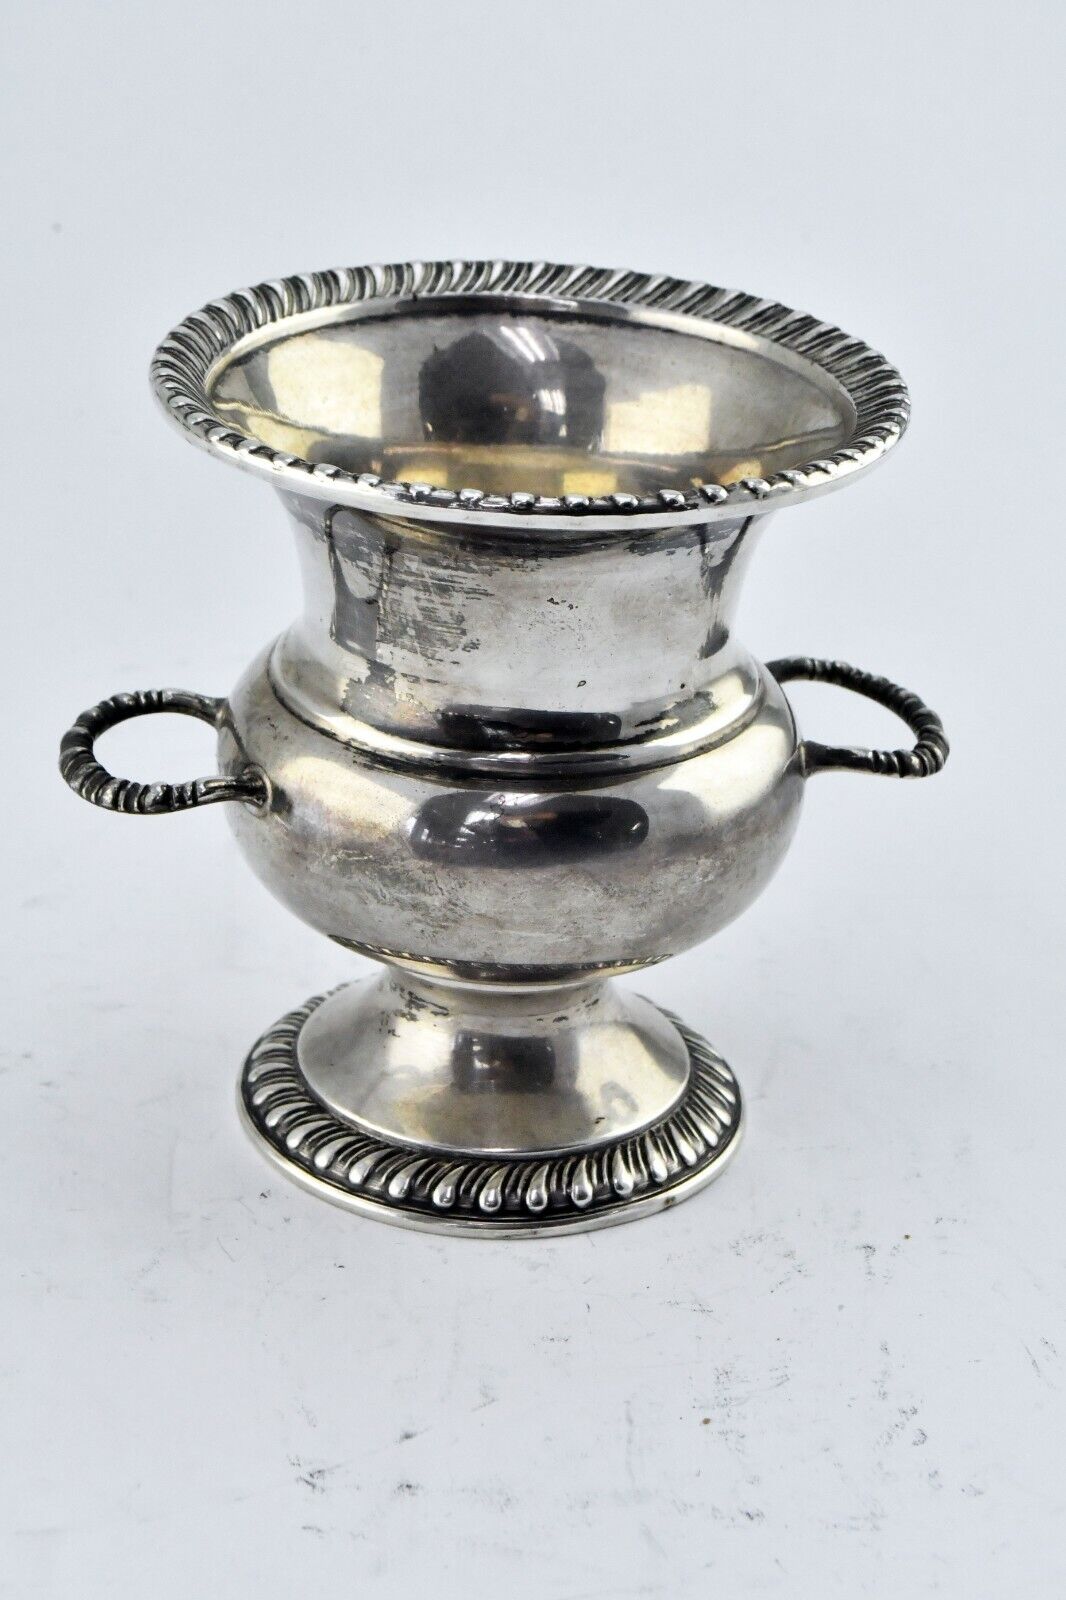 Mueck - Carey Co. Sterling Silver 3 3/8" Tall #505 Cigarette Urn 2.8oz.